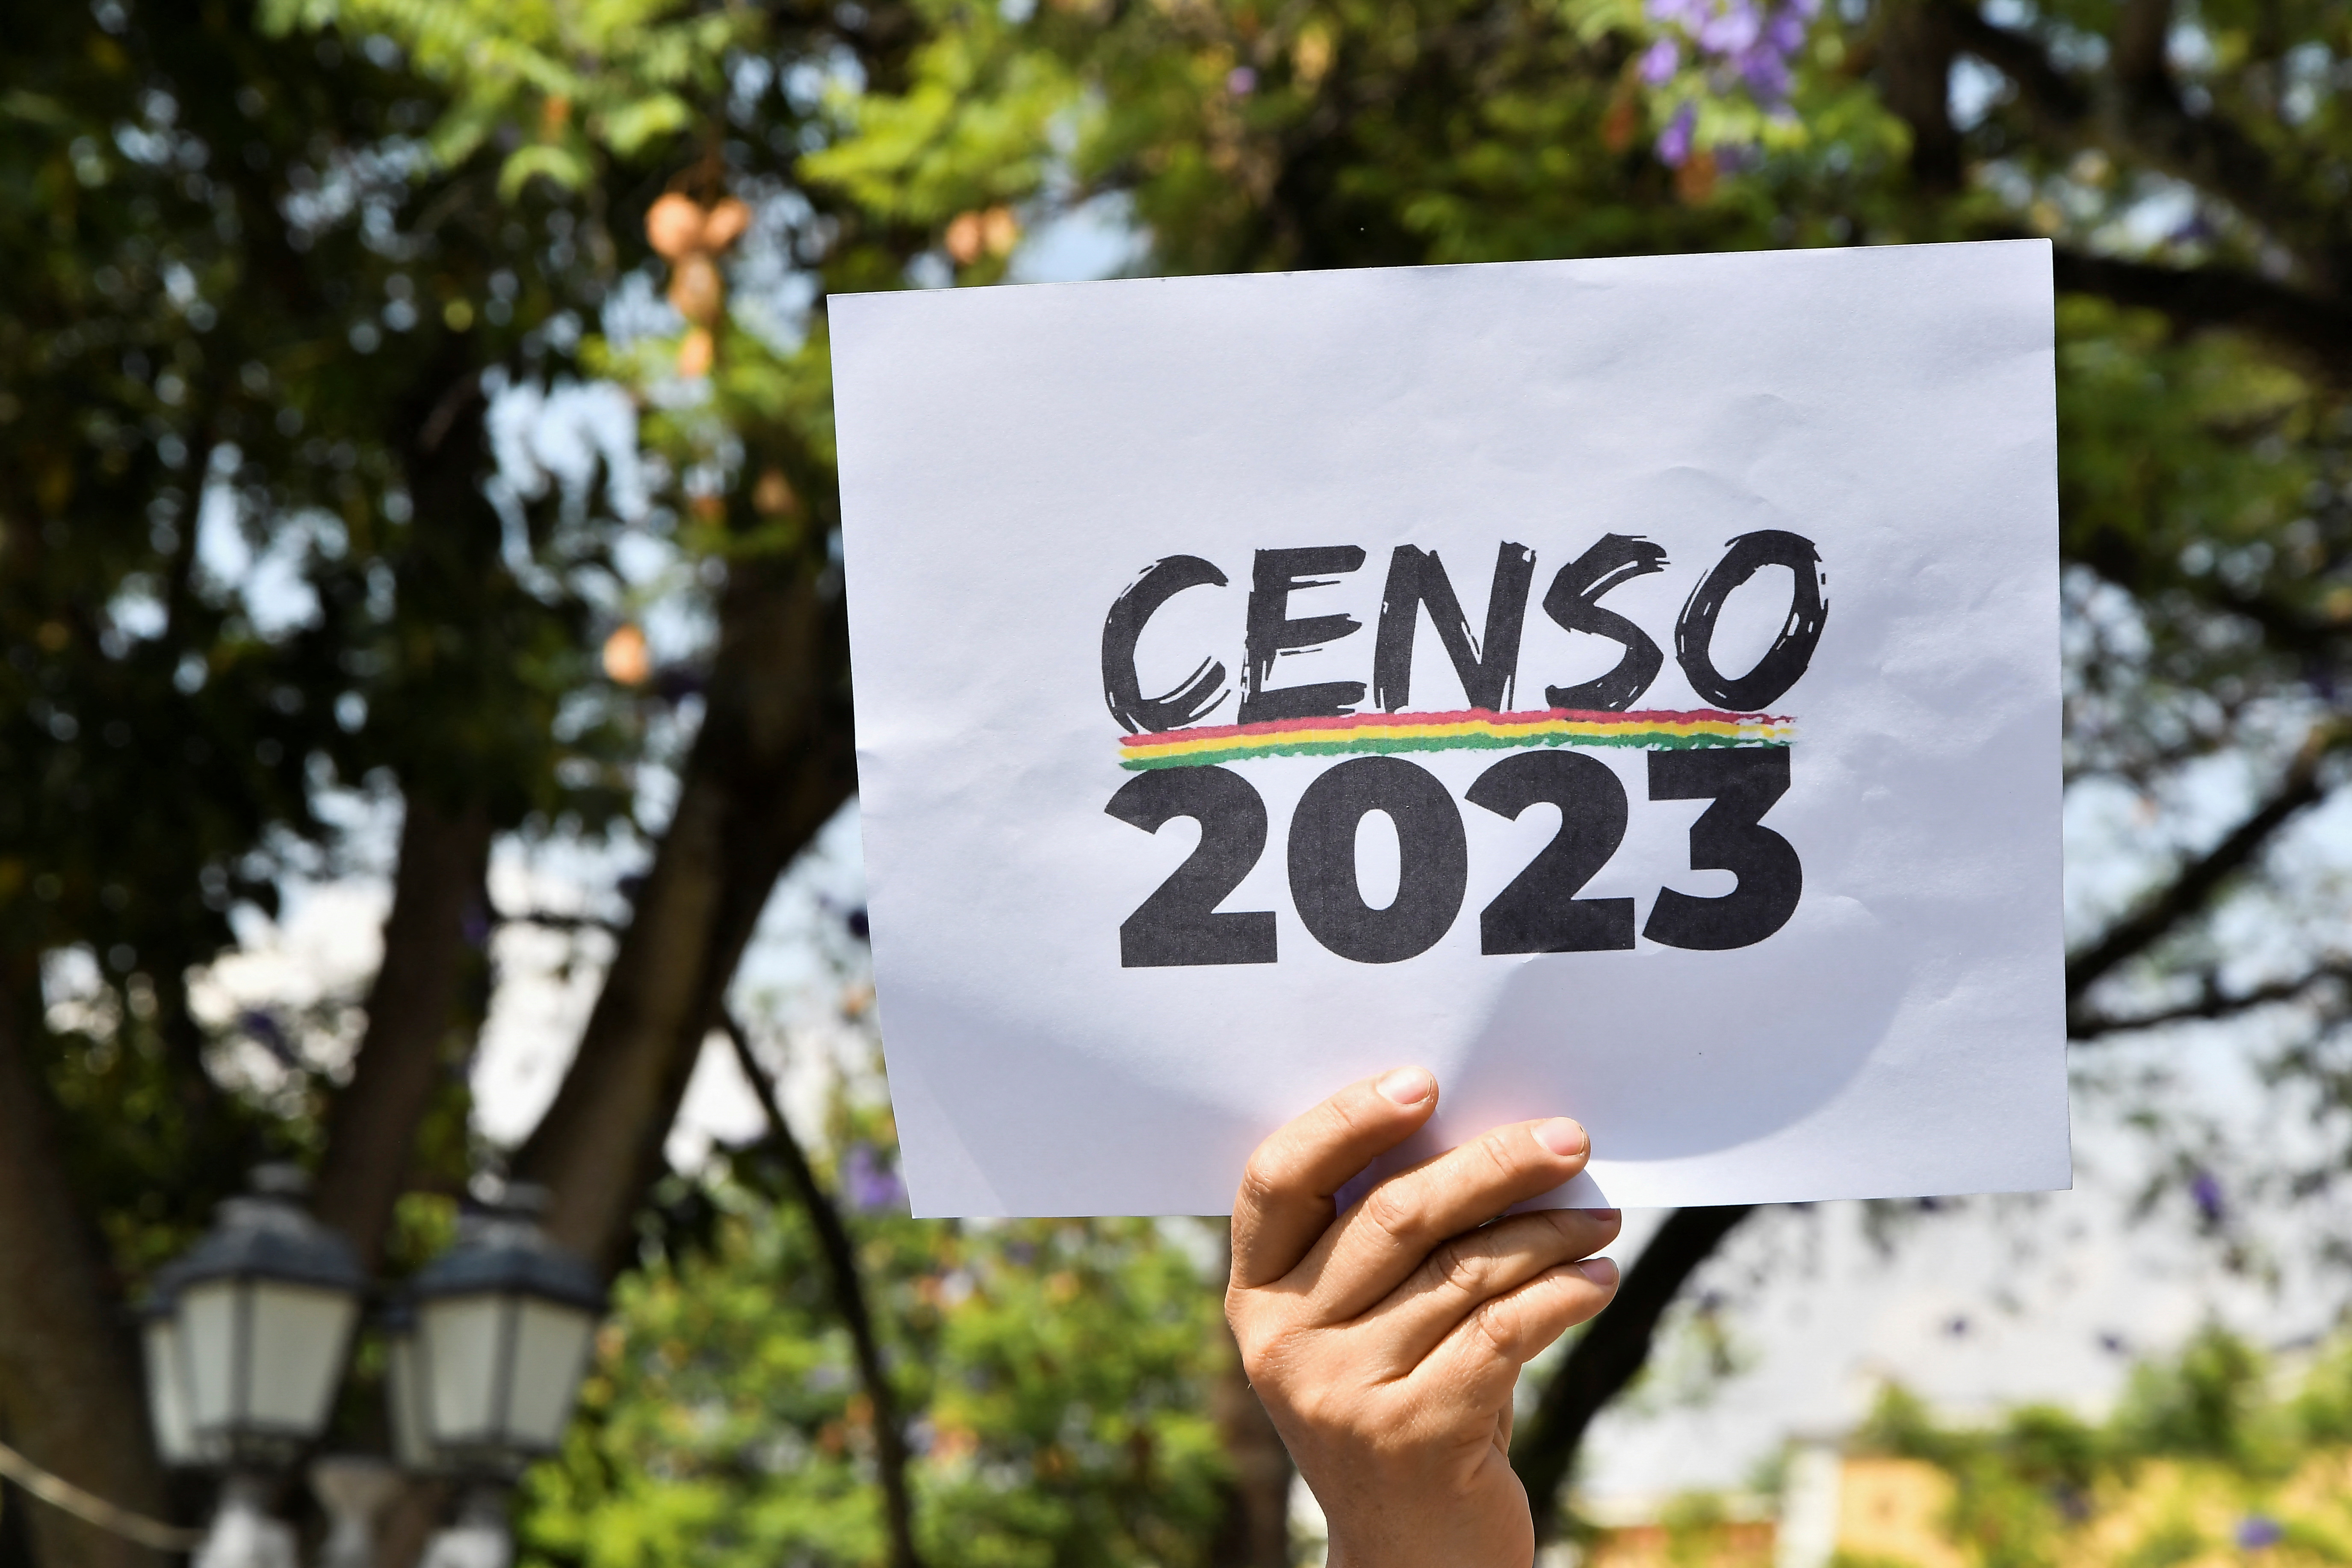 The Minister of the Presidency, María Nela Prada, assured the media that the proposals for the census in 2023 had a “purely political” criterion and regretted that Santa Cruz sent a person without “decision power” to the meeting to give “certainty ” to the country in the face of the conflicts in that region.  (REUTERS)